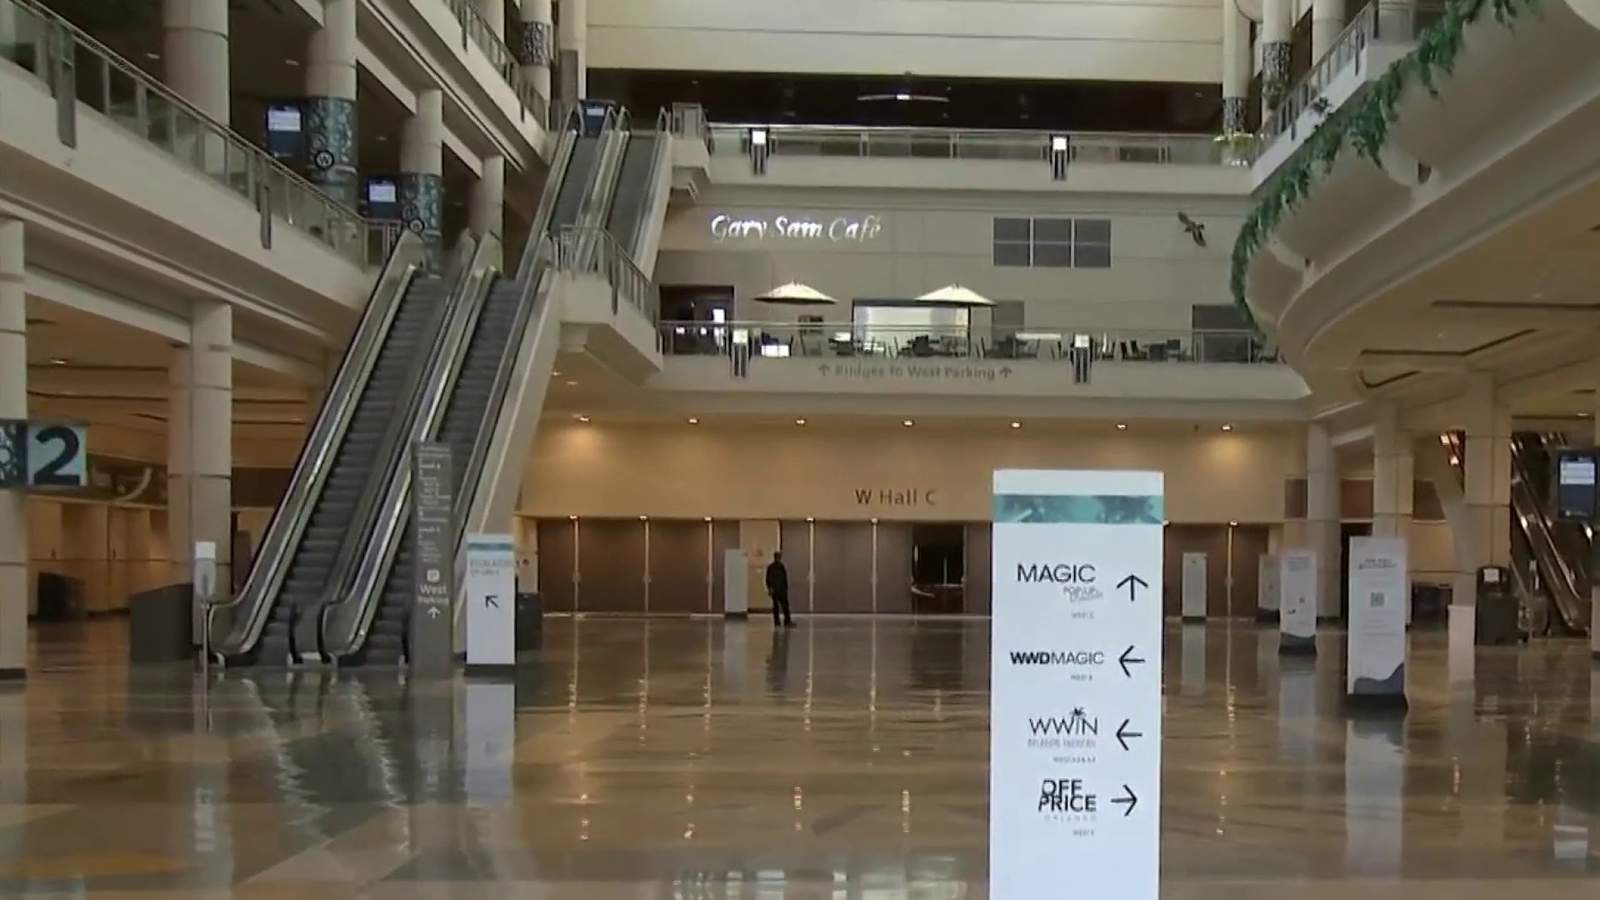 ‘We can do shows safely:’ Events are relocating from other venues to Orange County Convention Center